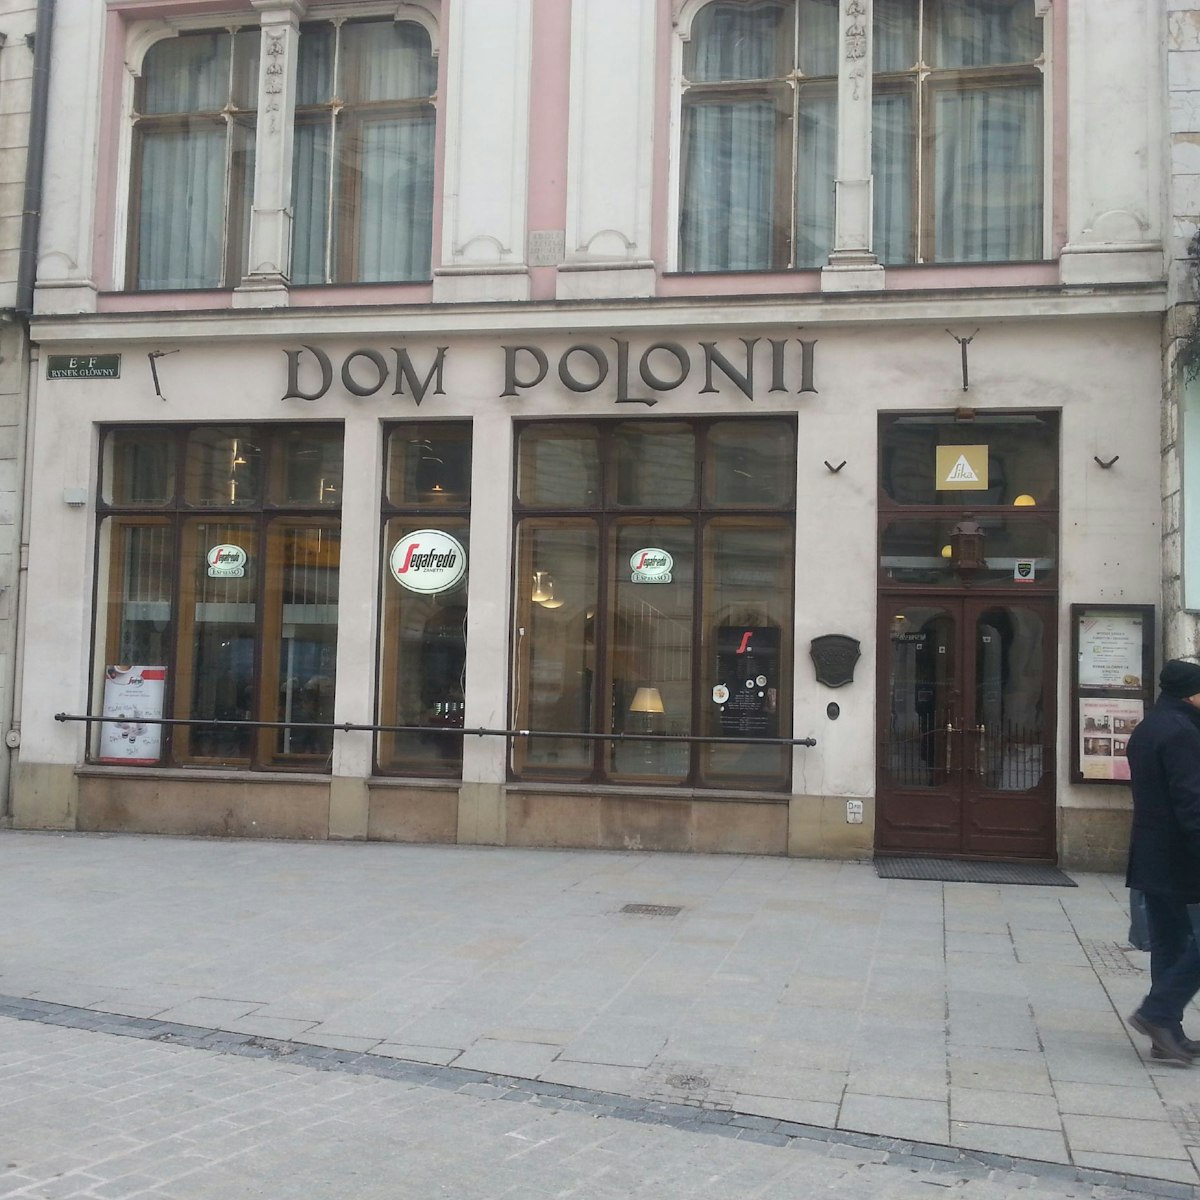 Dom Polonii, in the corner of the market square, the rooms are in a great spot for a good view.